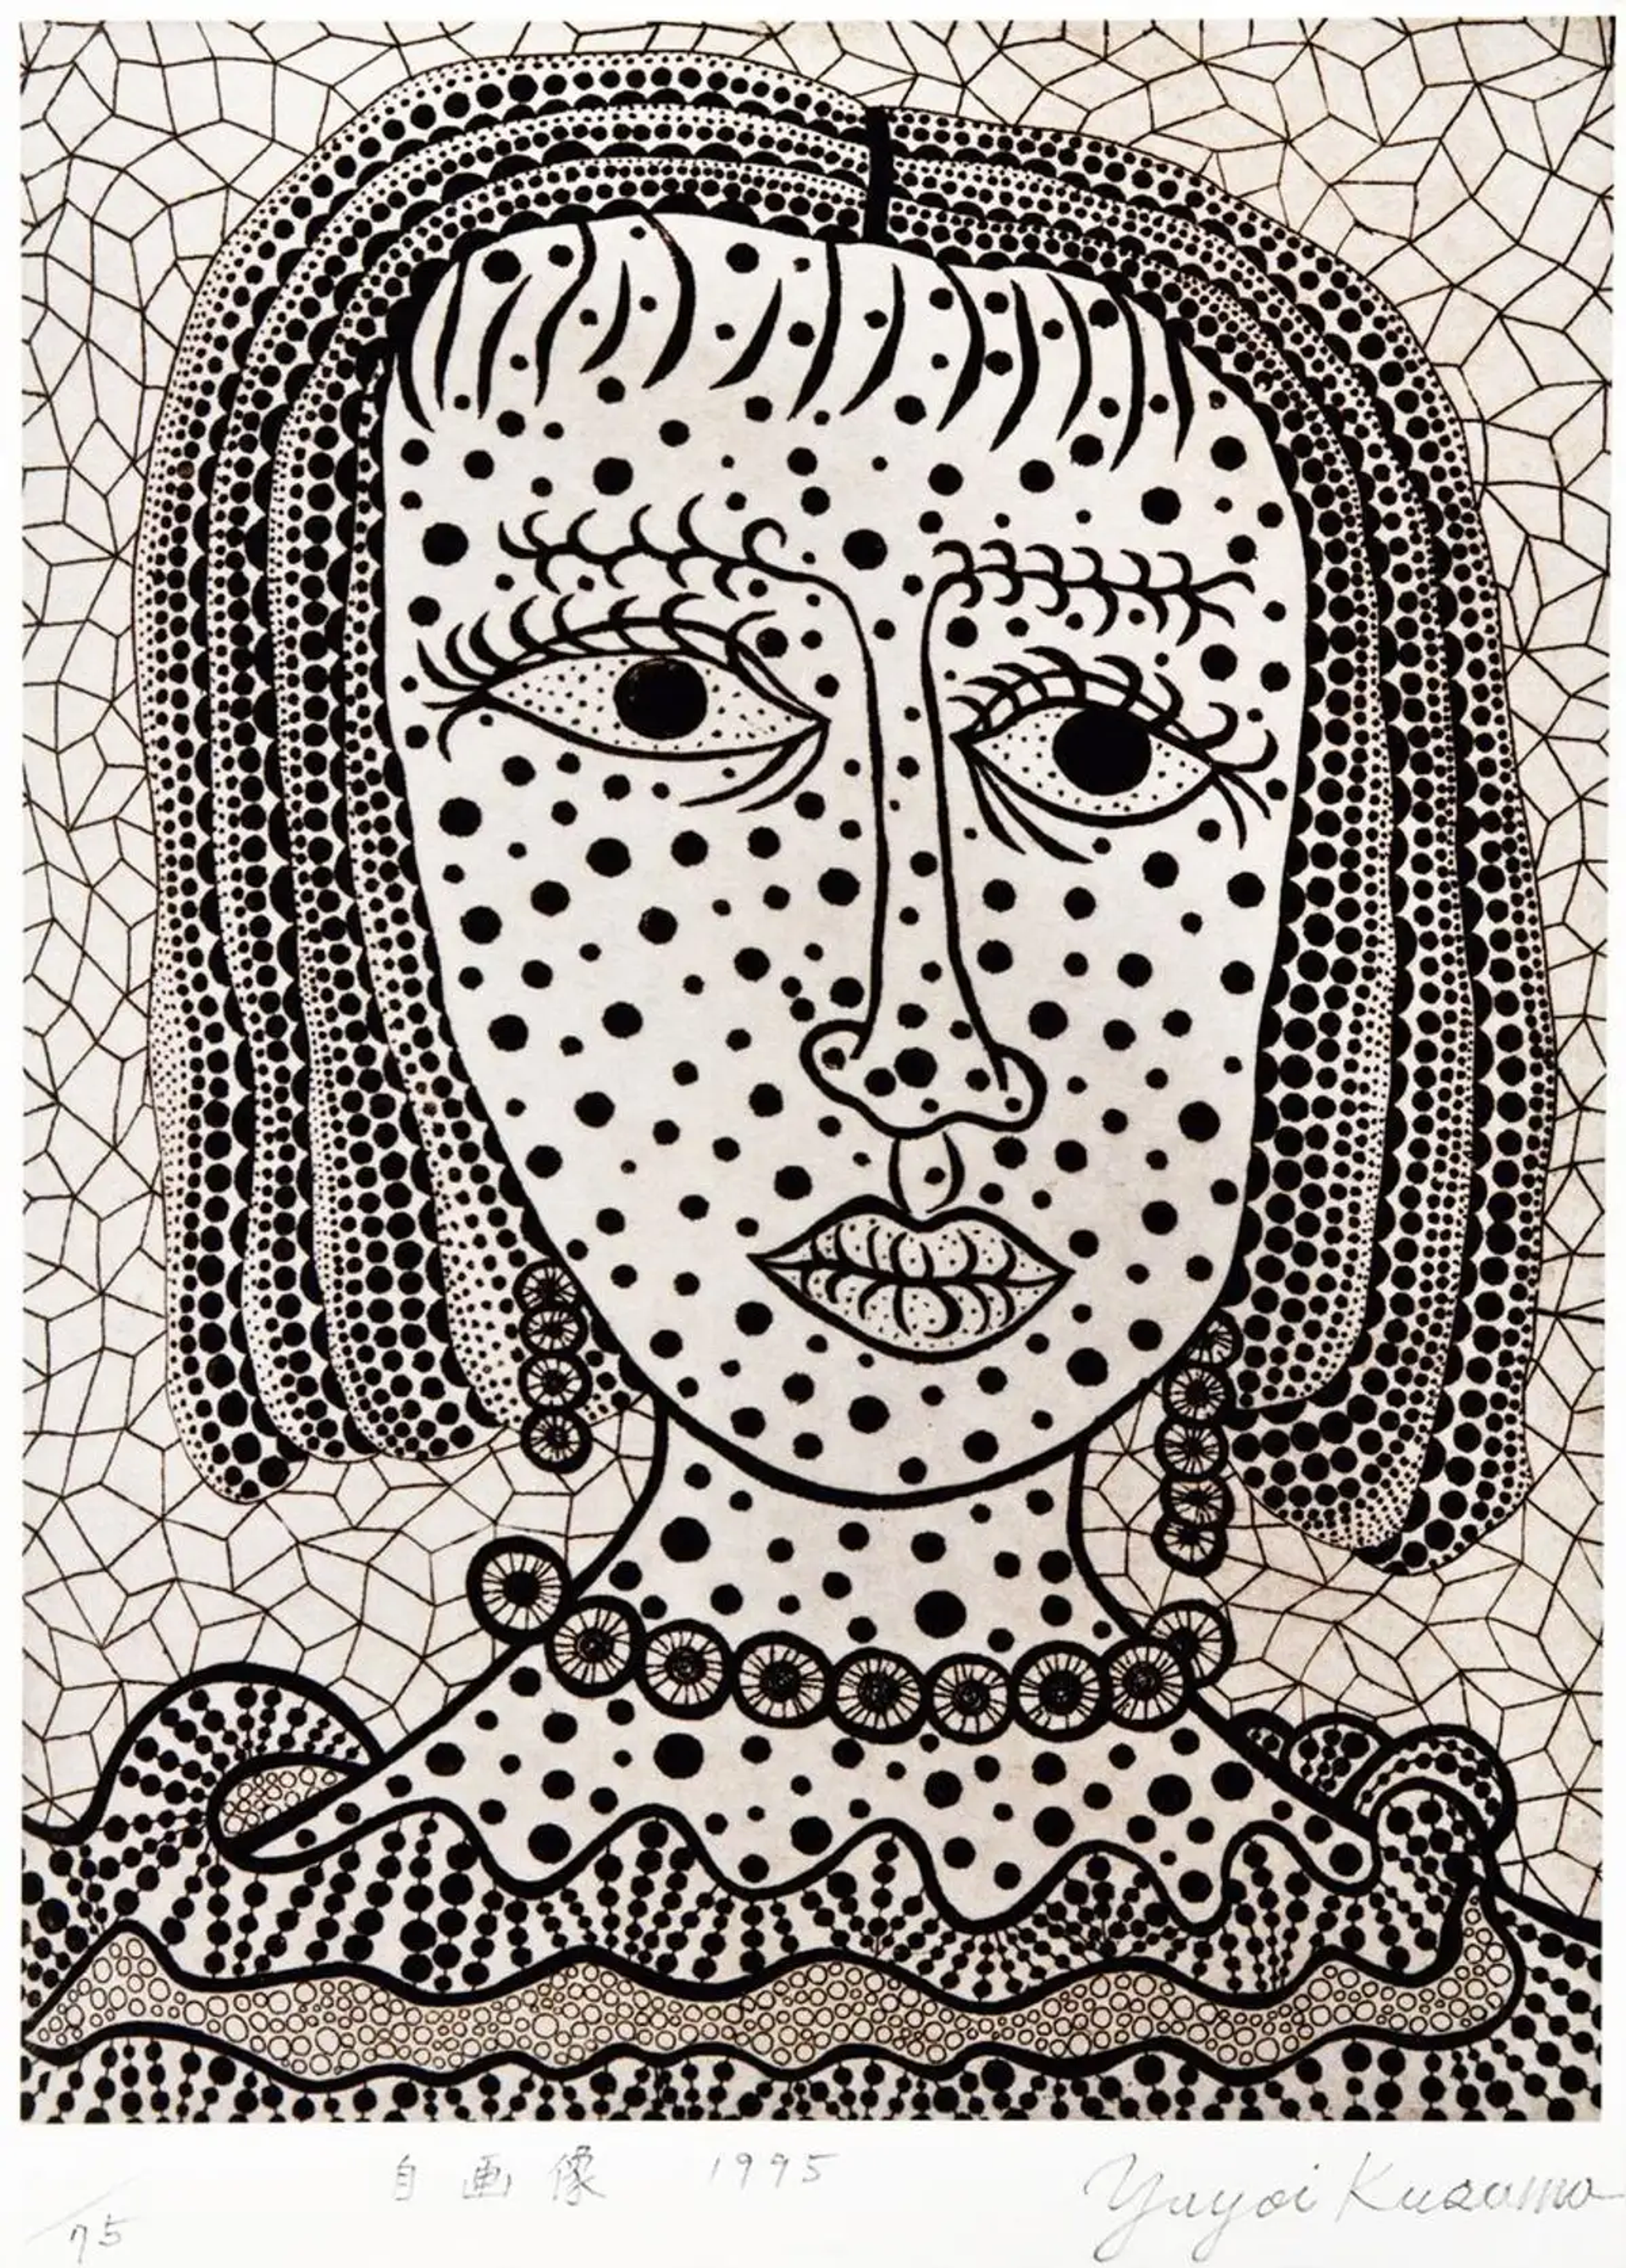 An image of one of Yayoi Kusama's self portraits. She is depicted in monochrome and in a variety of patterns, including polka dots and lines. 